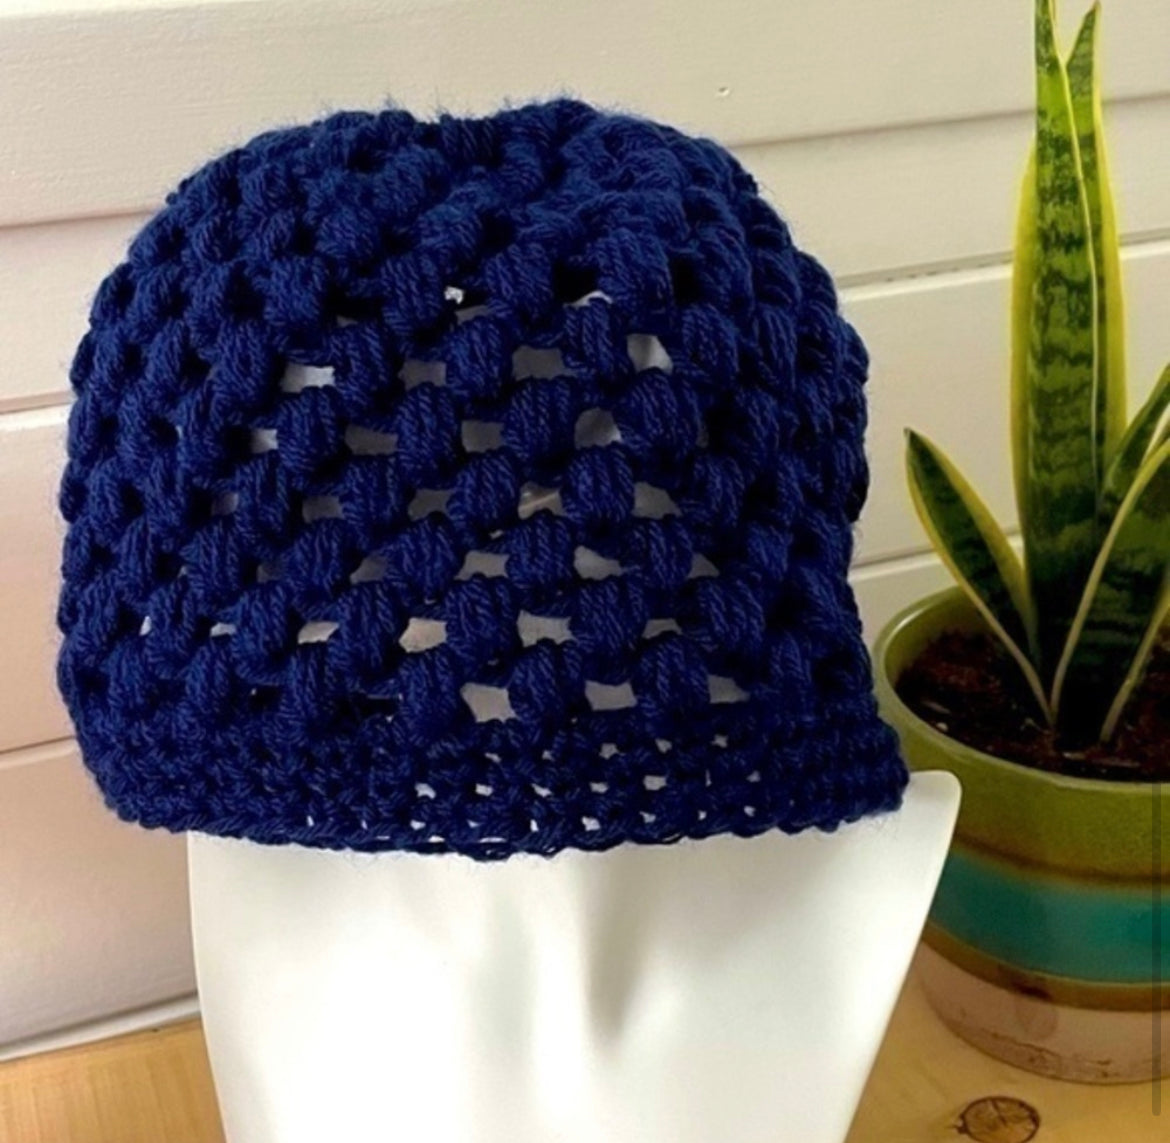 Royal Blue Messy Bun Ponytail Hat Open Puffy Stitch Hand Crochet Knit Outdoor Walking Hiking Active Athletes Winter